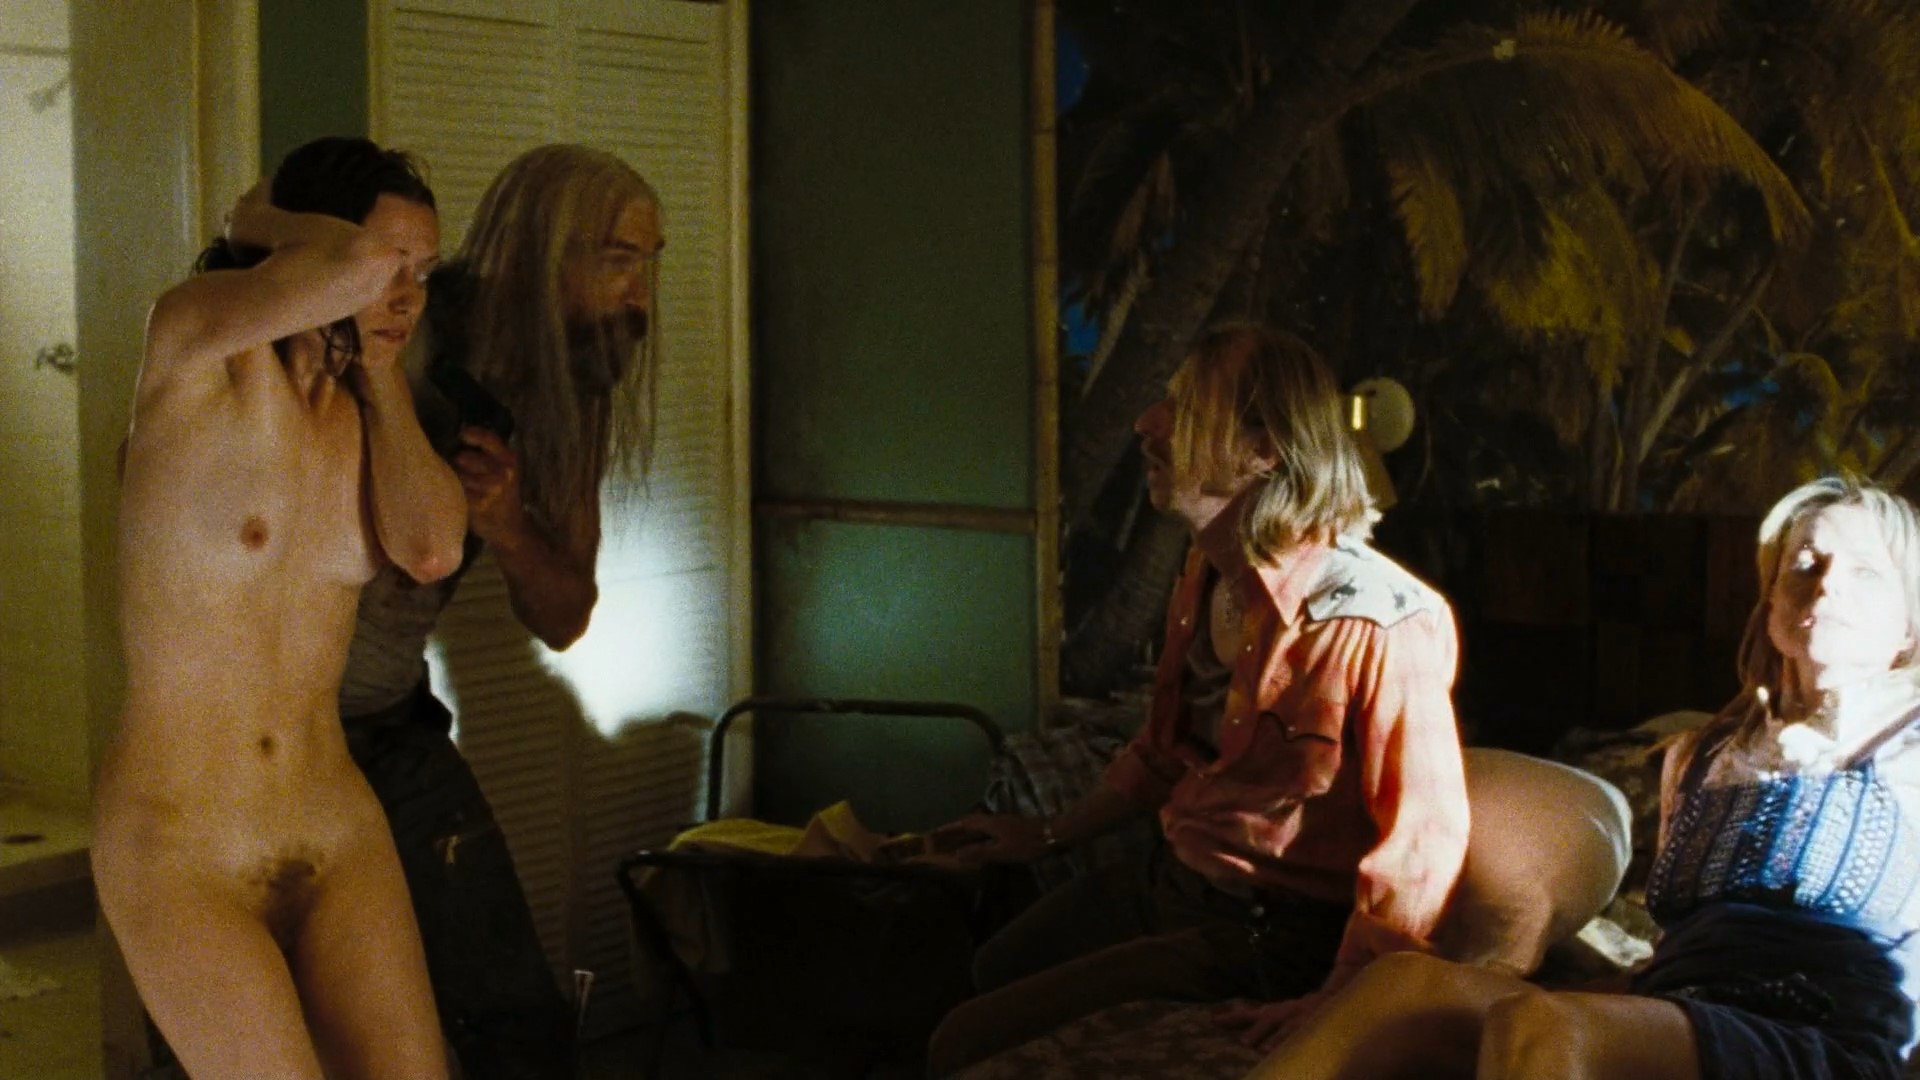 Kate Norby, Sheri Moon Zombie - The Devil’s Rejects (2005) HD 1080p